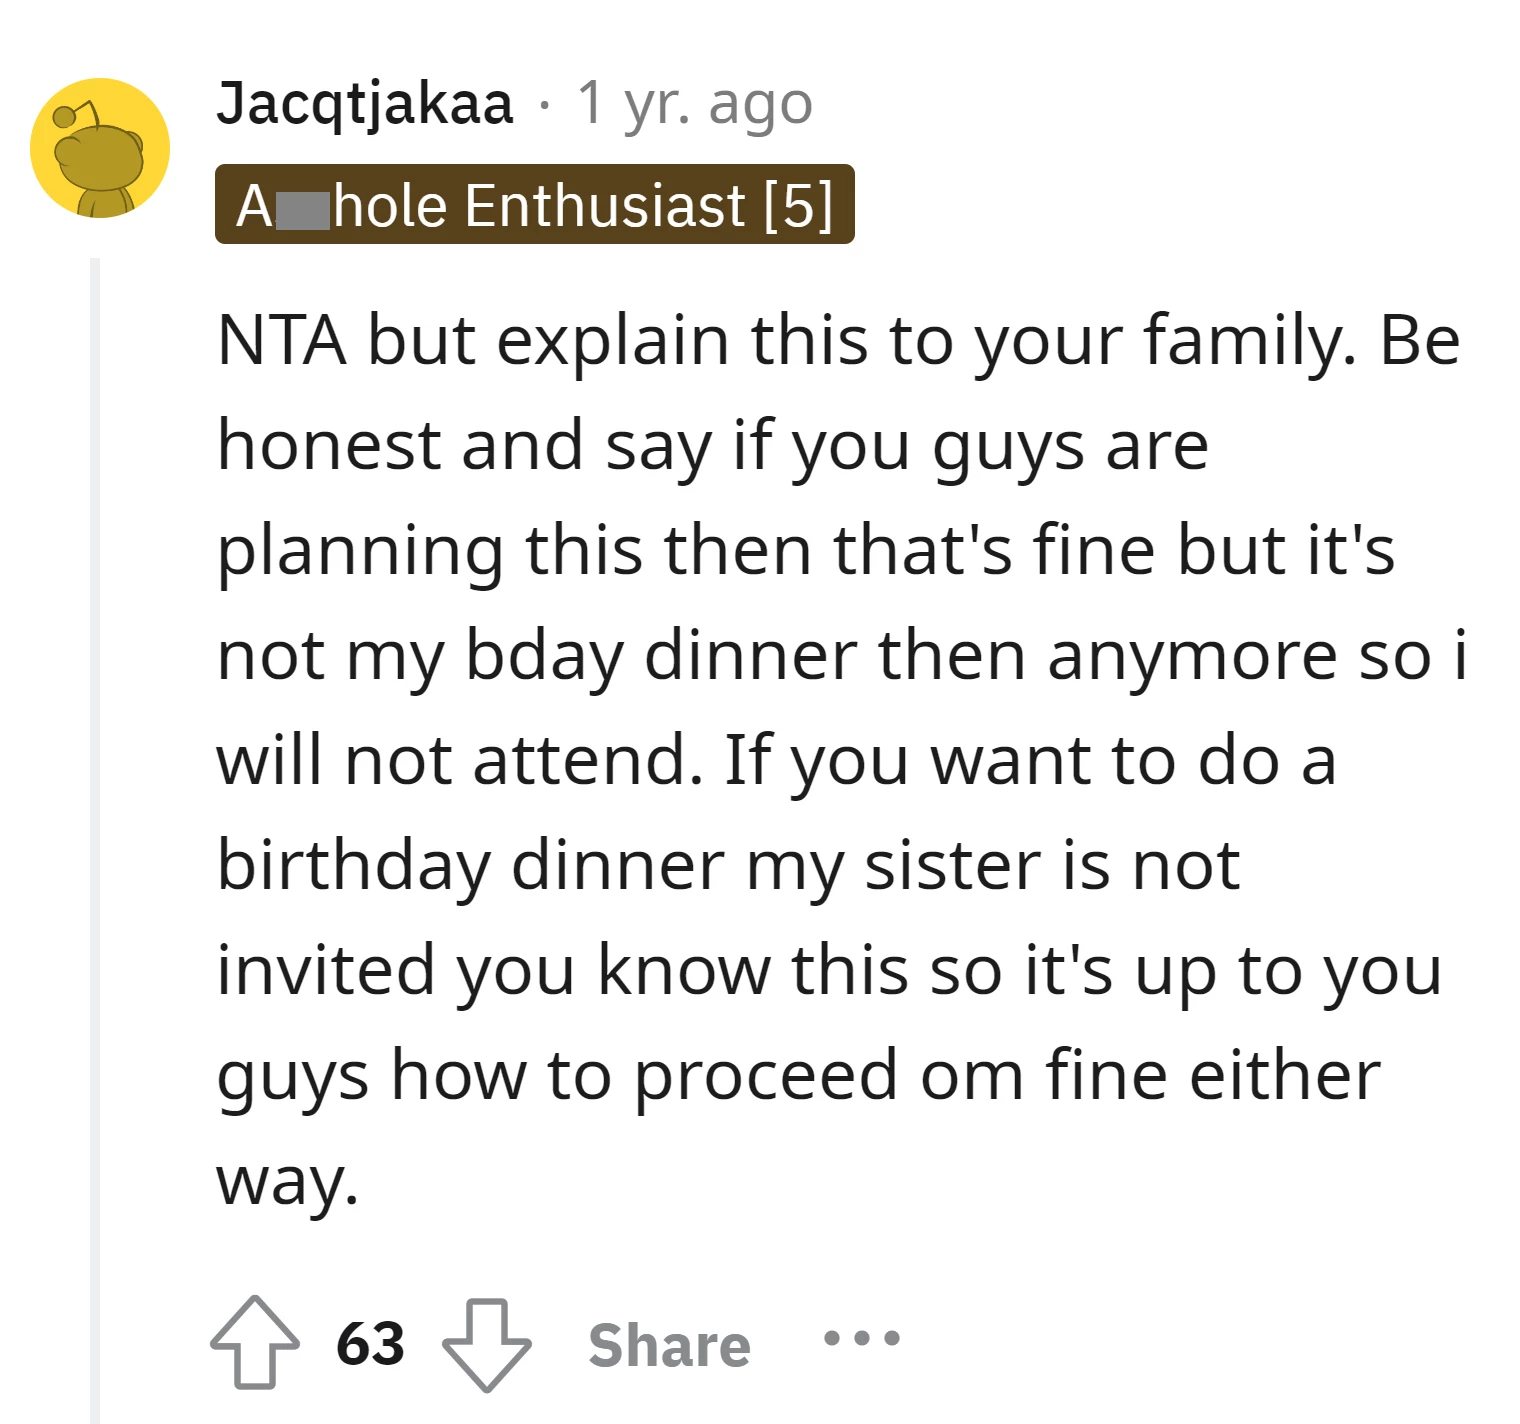 The OP should communicate honestly with their family